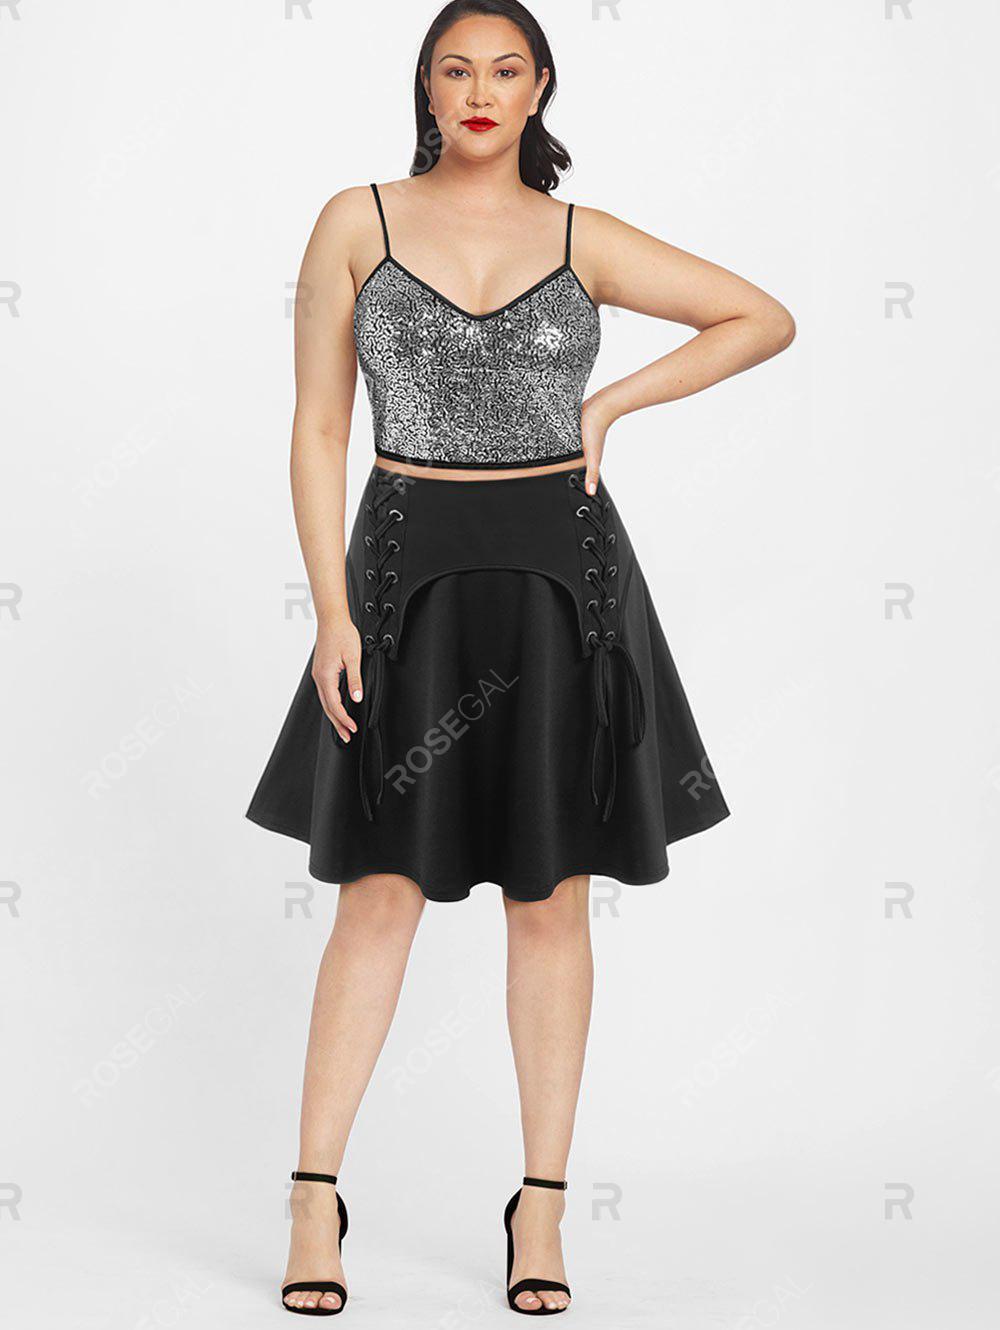 Sequin Bra Top and Lace Up Mini A Line Skirt Plus Size Festival Outfit